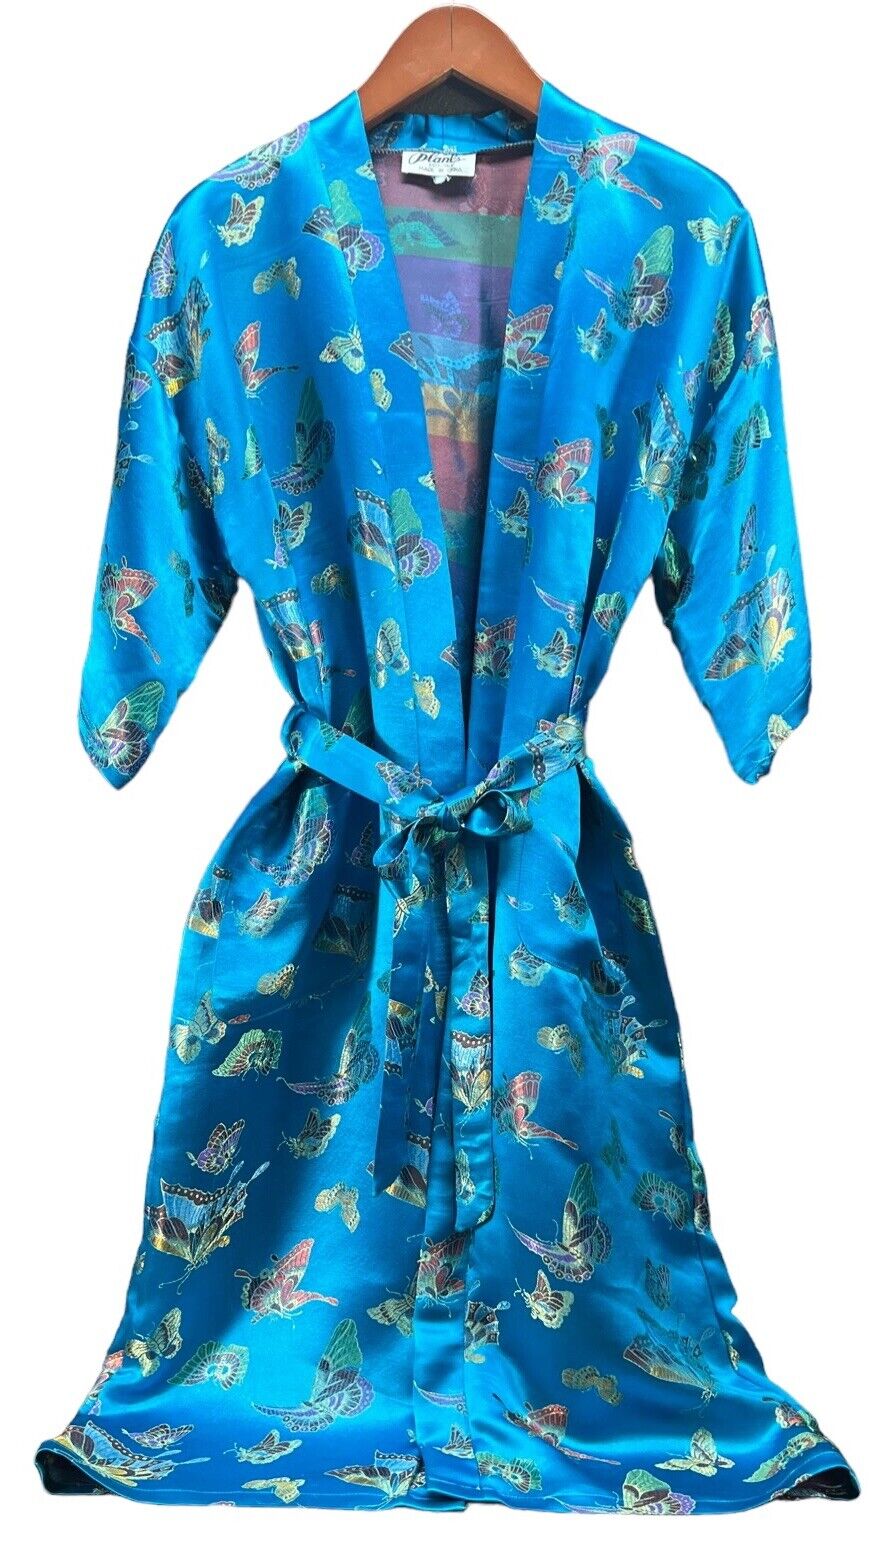 Planls Made in China 100% Silk Butterfly Women’s Kimono Robe S/M